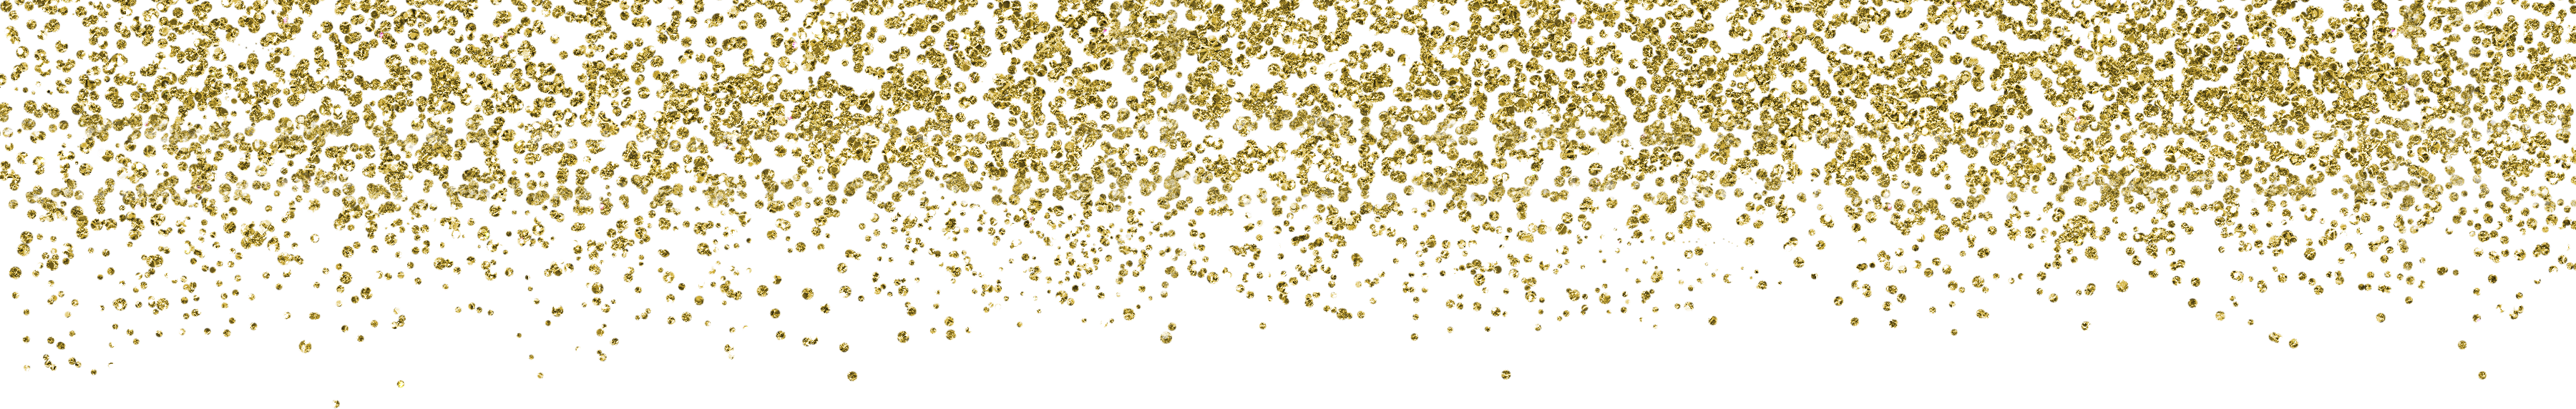 Glitter Gold Sparkle PNG High-Quality Image